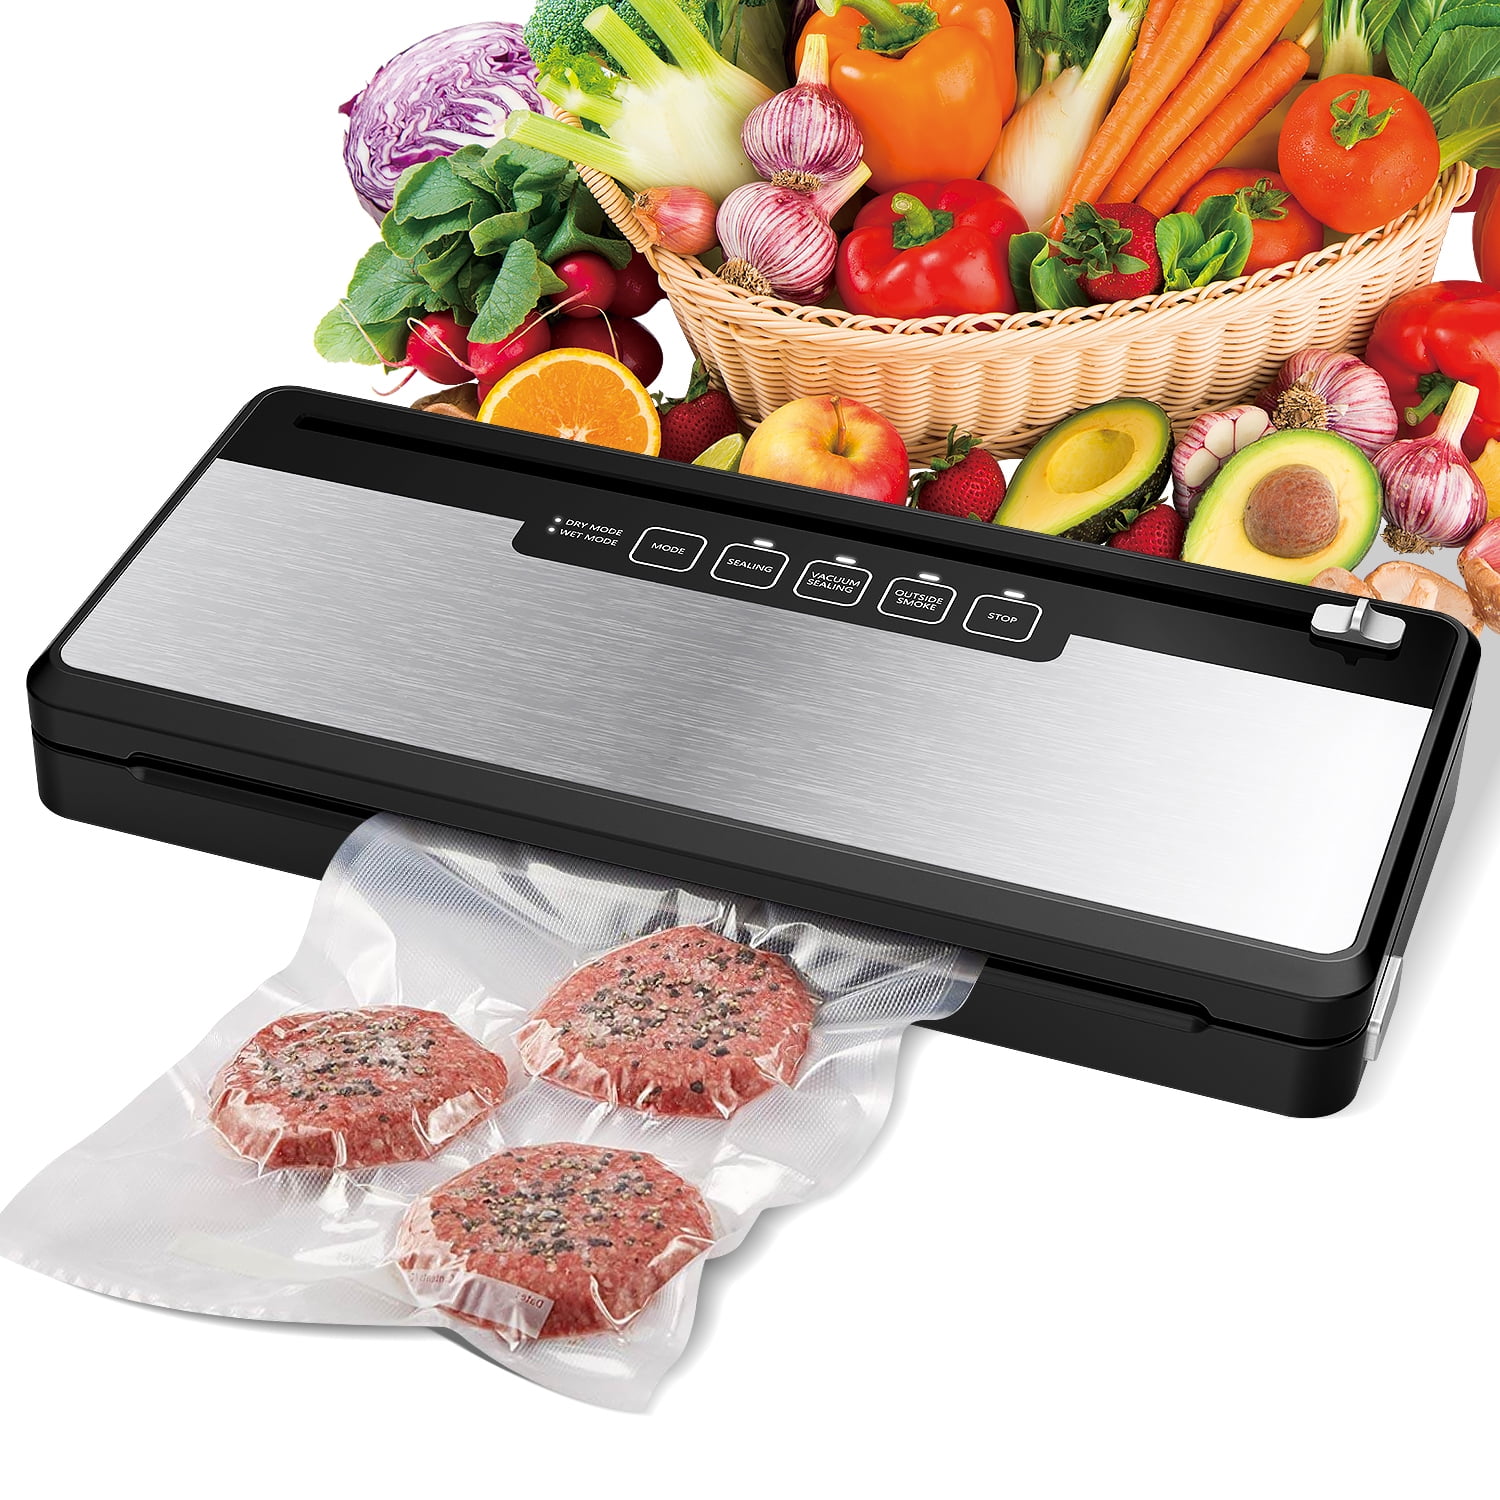 Humsure Vacuum Sealing Machine, Manual Food Vacuum Sealing Machine, And  Powerful Automatic Food Vacuum Sealing Machine Have Strong Suction Force  And Are Easy To Operate. The Compact And Multifunctiona 